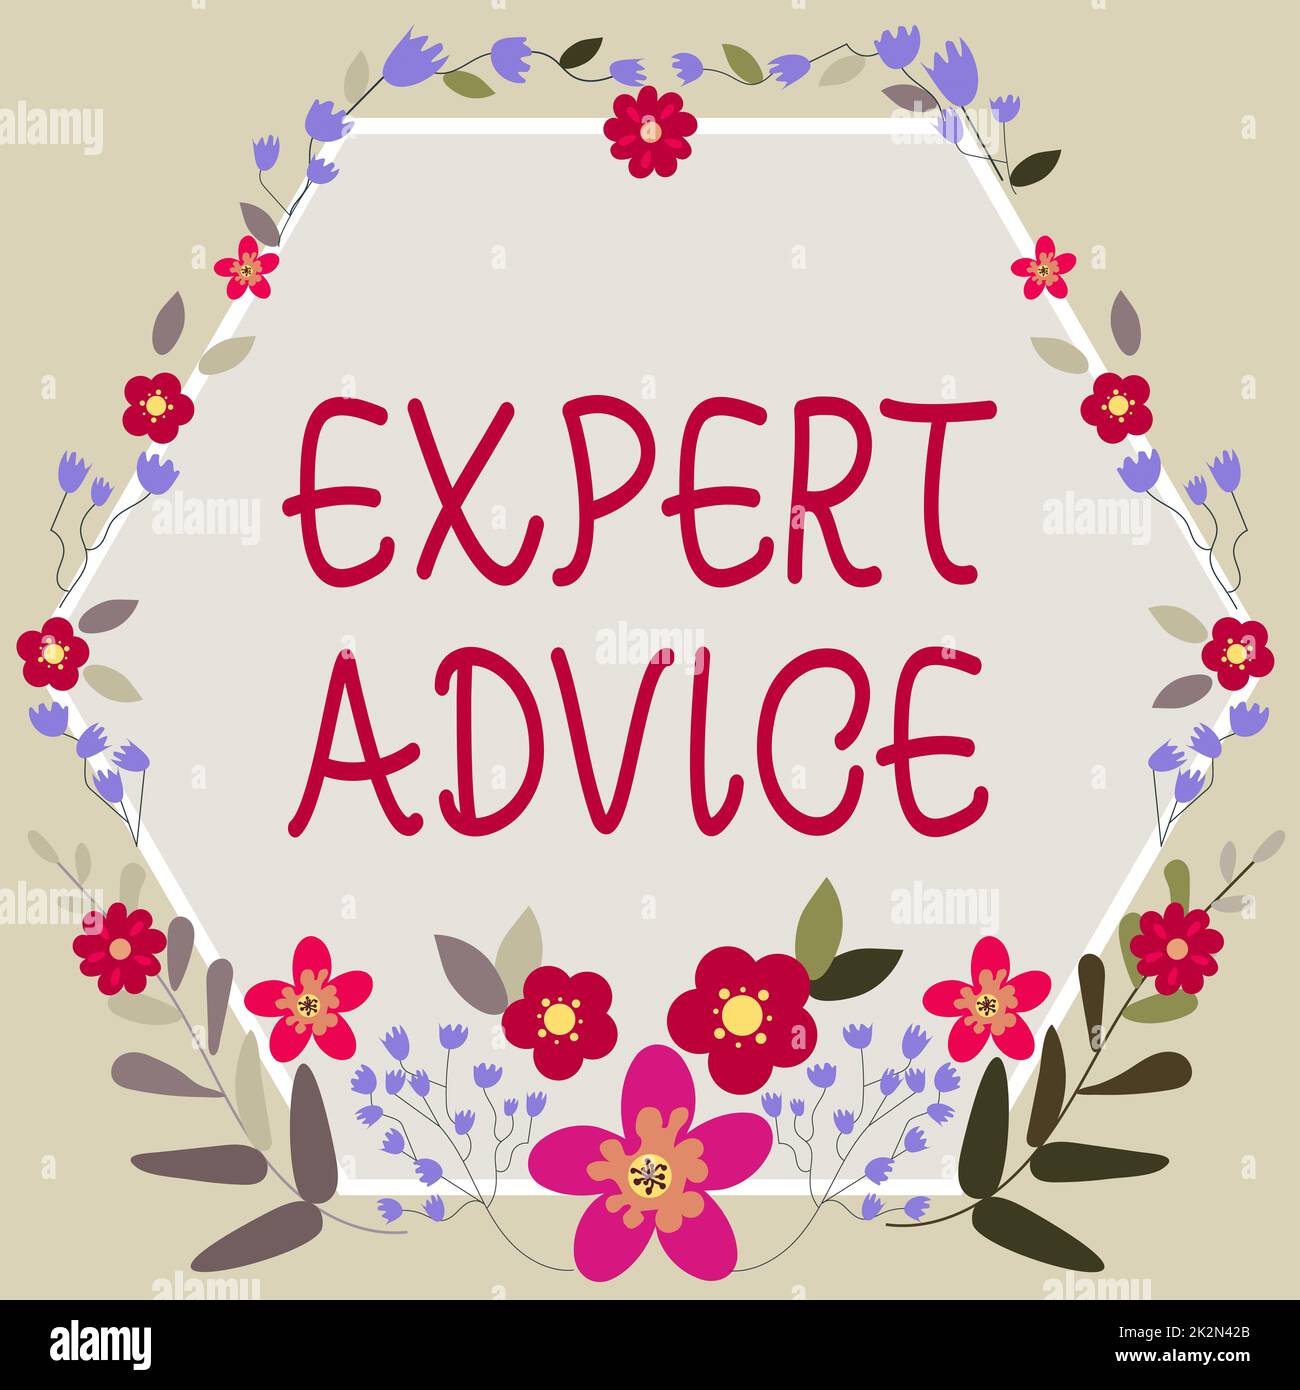 Text caption presenting Expert Advice. Concept meaning Sage Good Word Professional opinion Extensive skill Ace Blank Frame Decorated With Abstract Modernized Forms Flowers And Foliage. Stock Photo